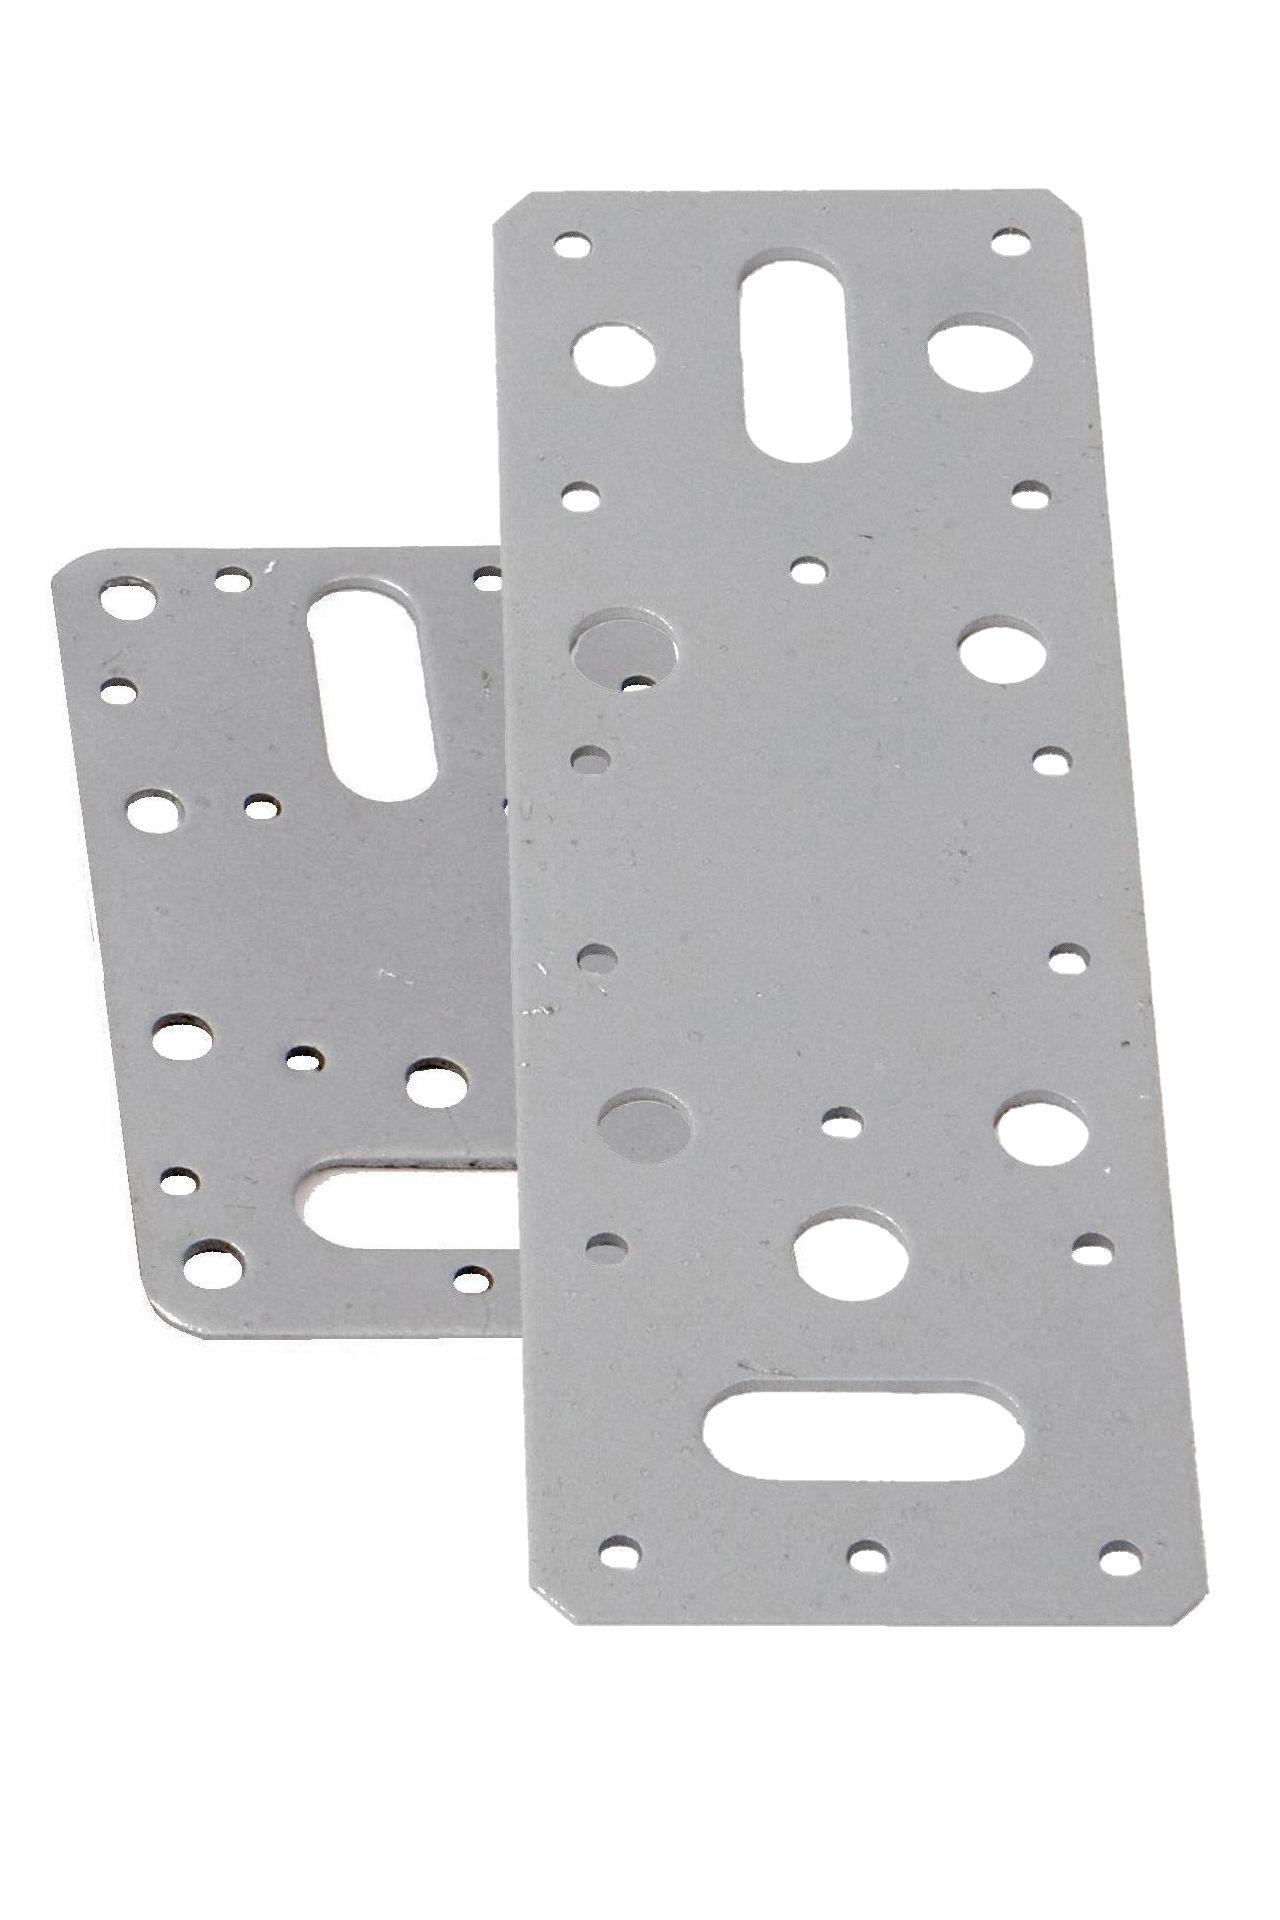 Galvanised Flat Connector Plates